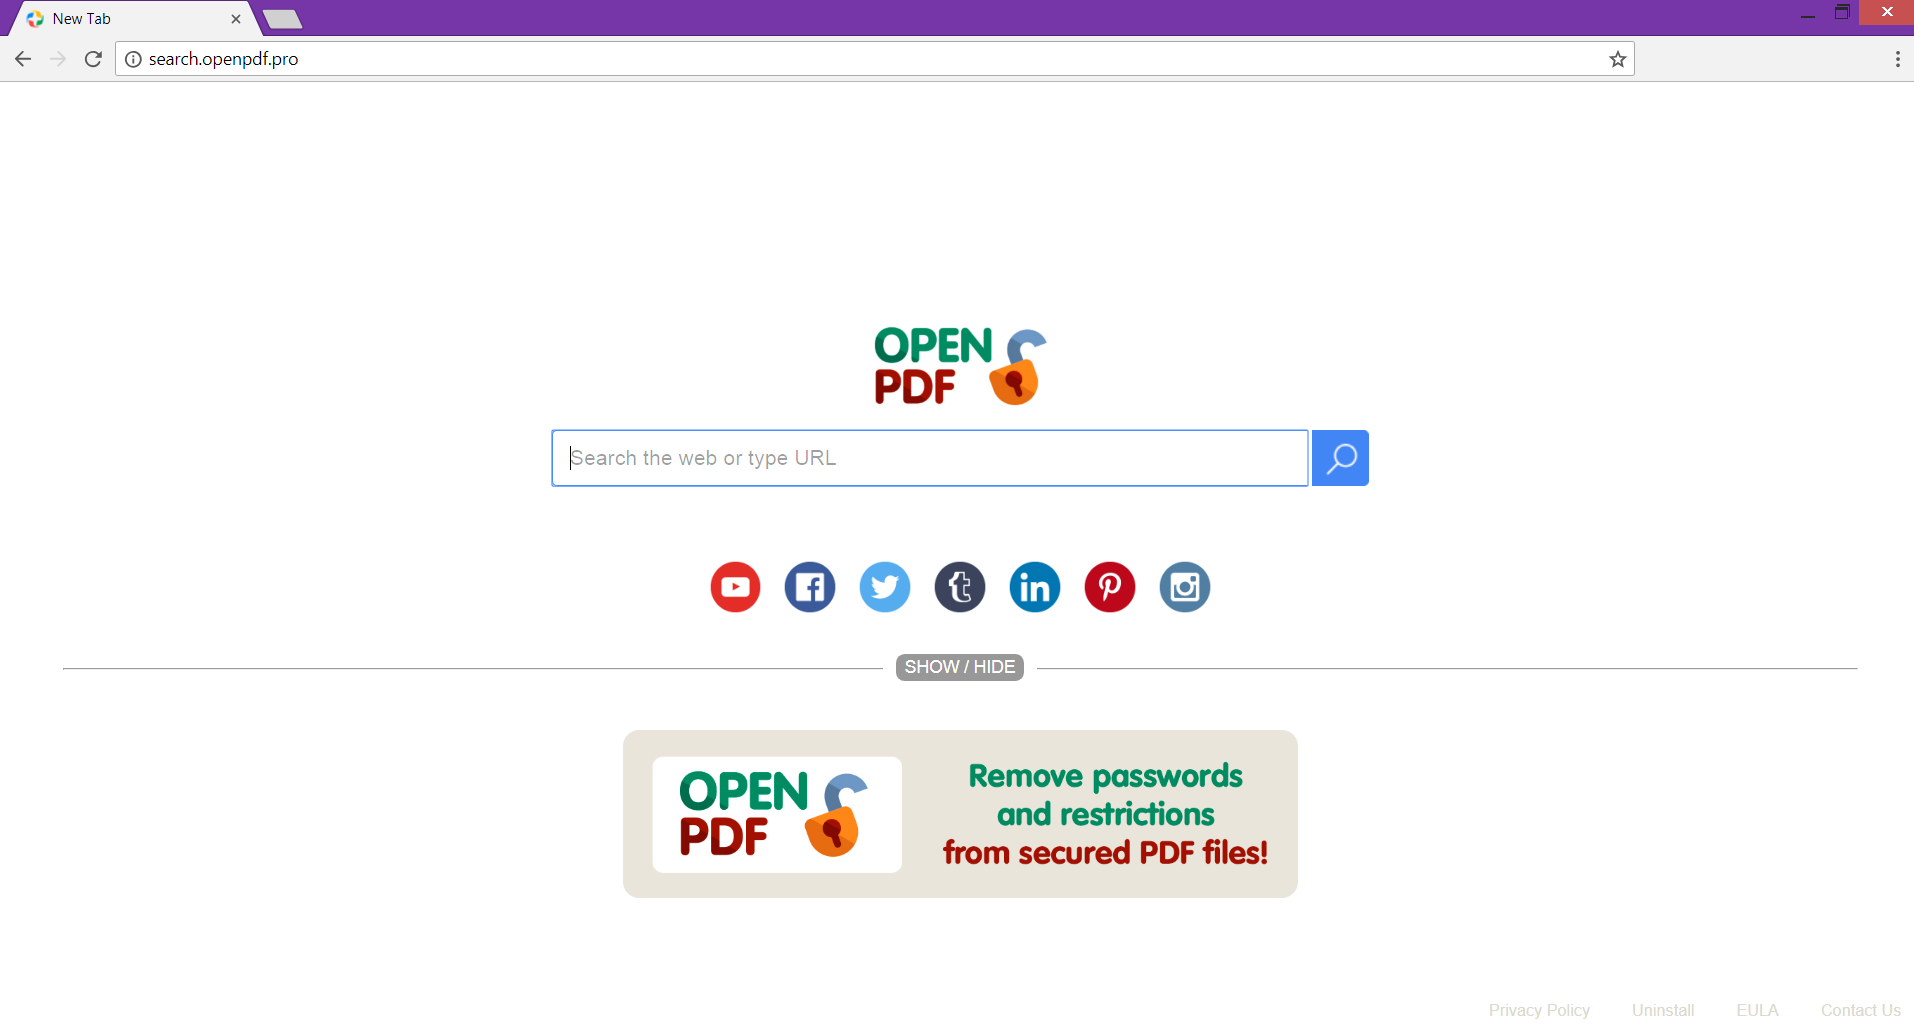 Search.openpdf.pro hoax search engine main page